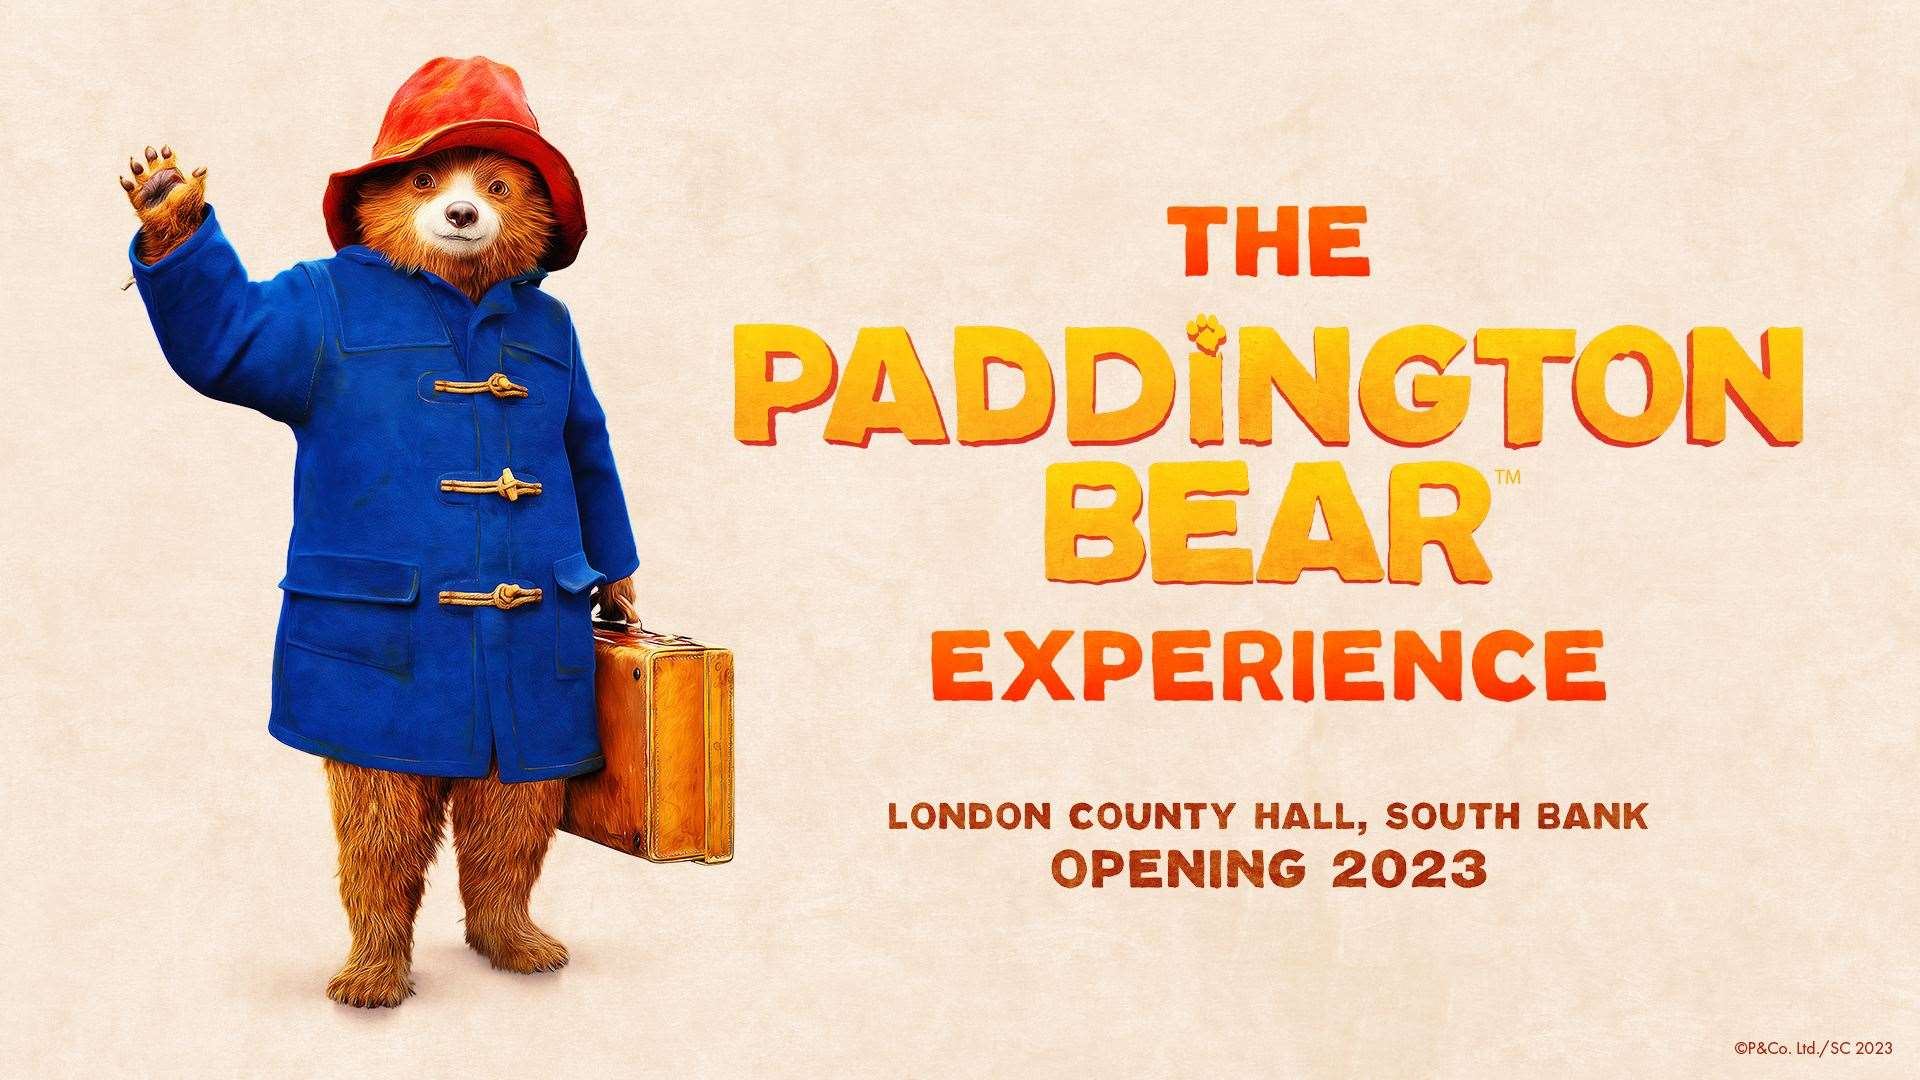 The Paddington Bear Experience opens in 2023 (The Paddington Bear Experience/PA)